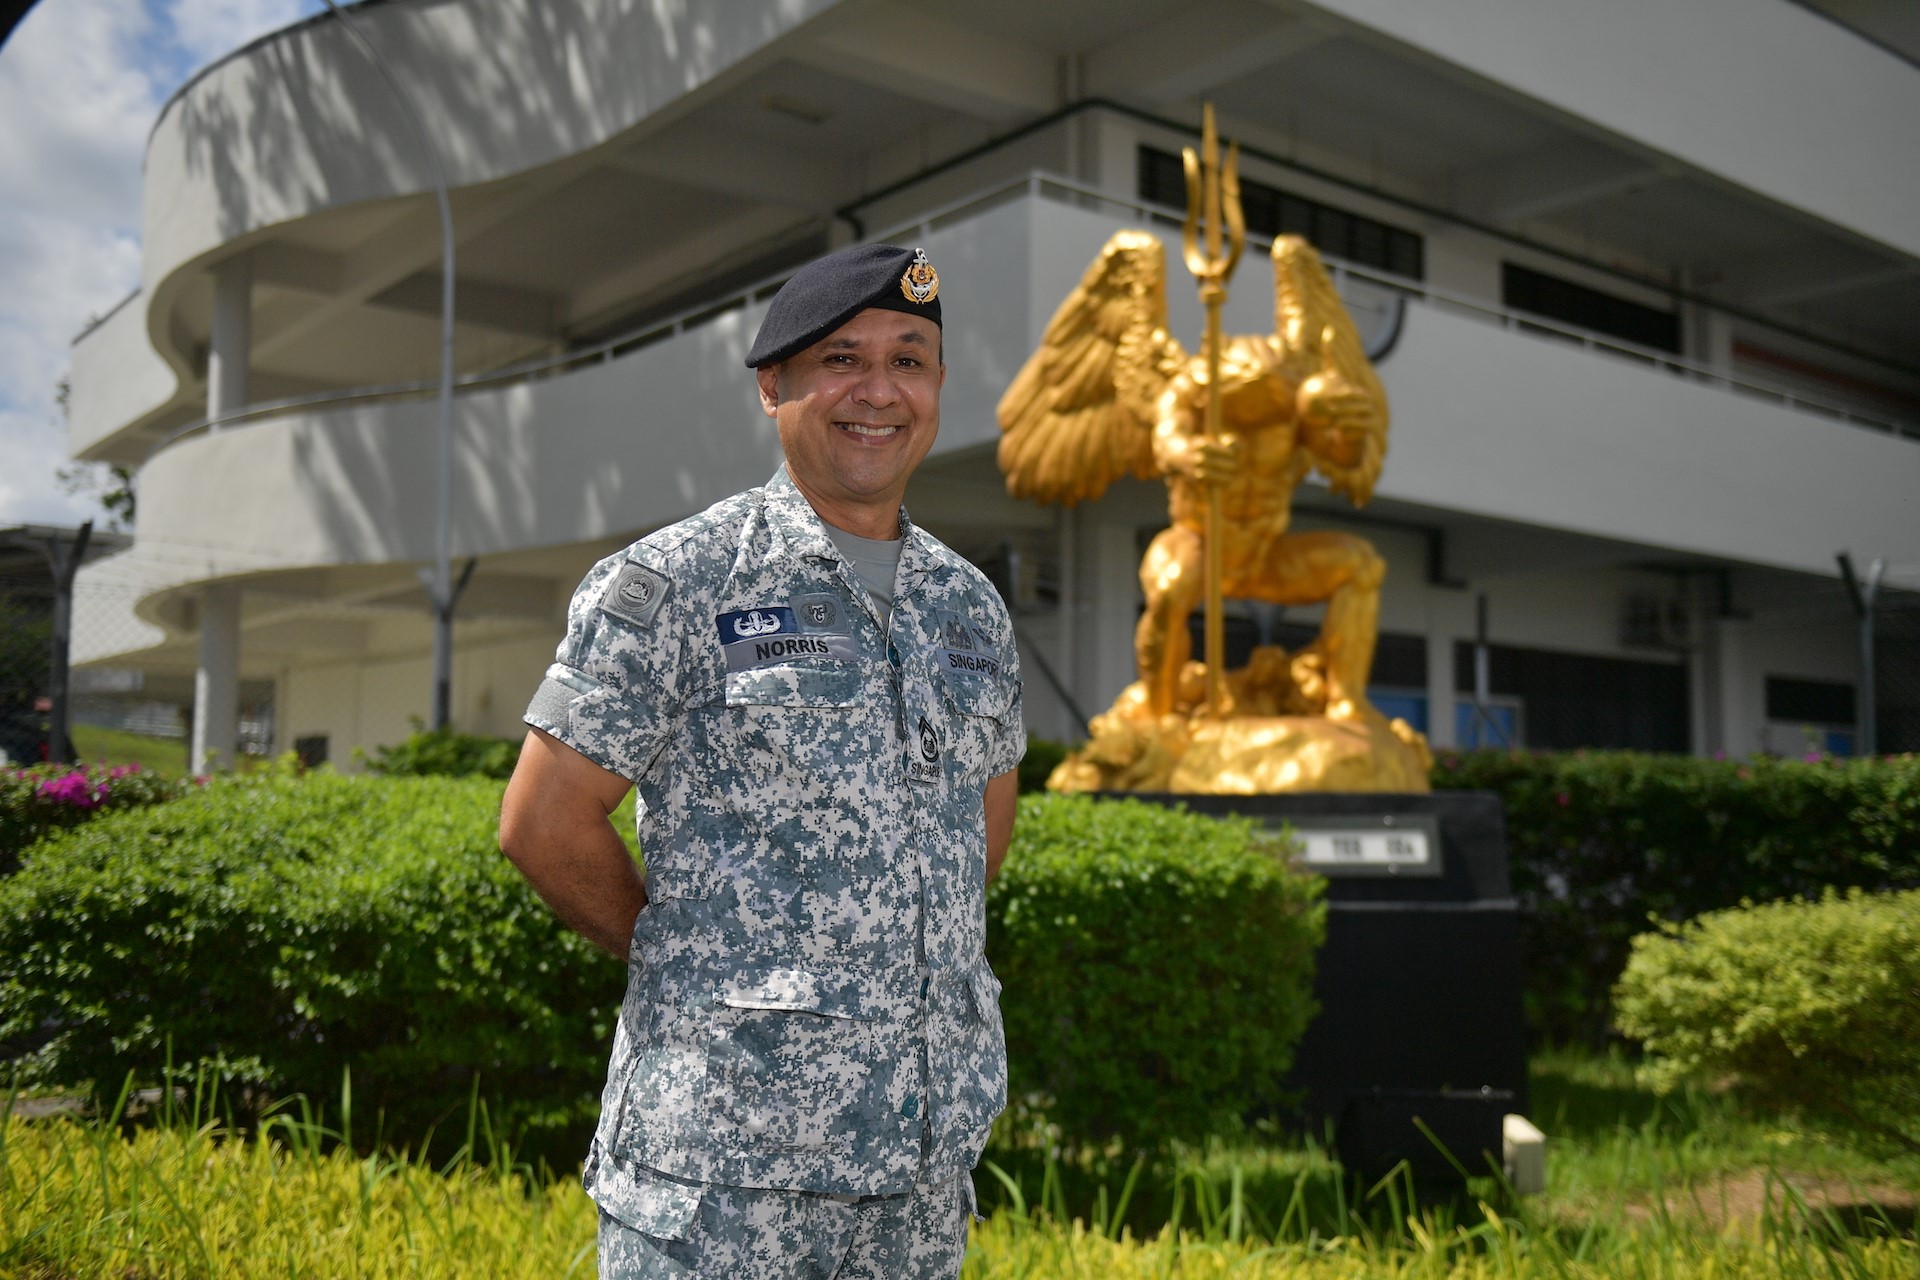 Longest-serving frogman in NDU continues to train young tadpoles